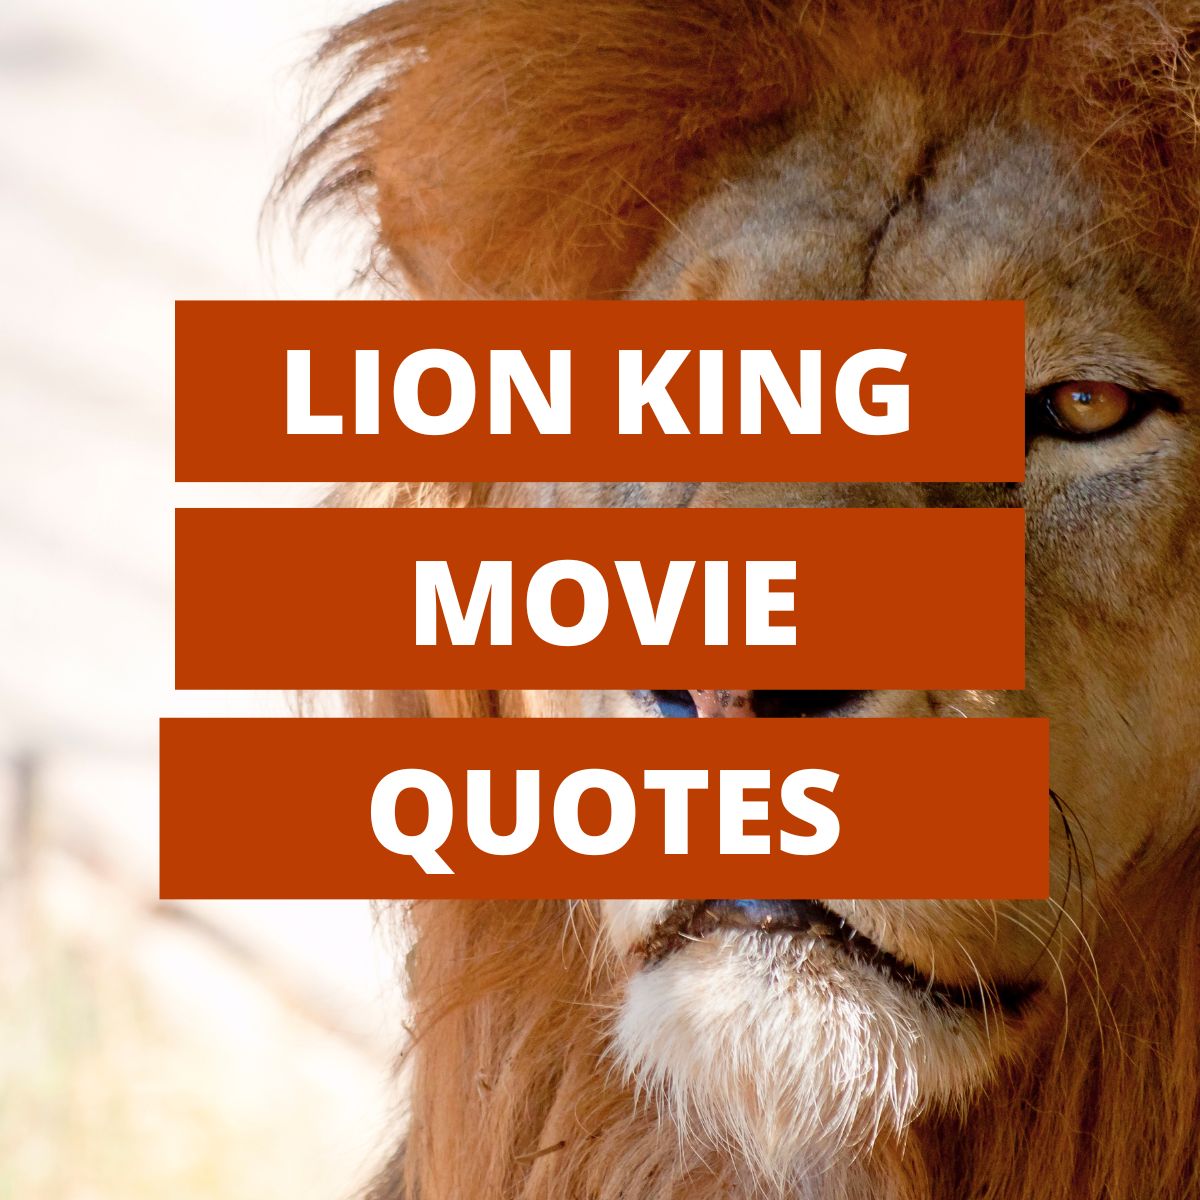 lion king movie quotes featured image